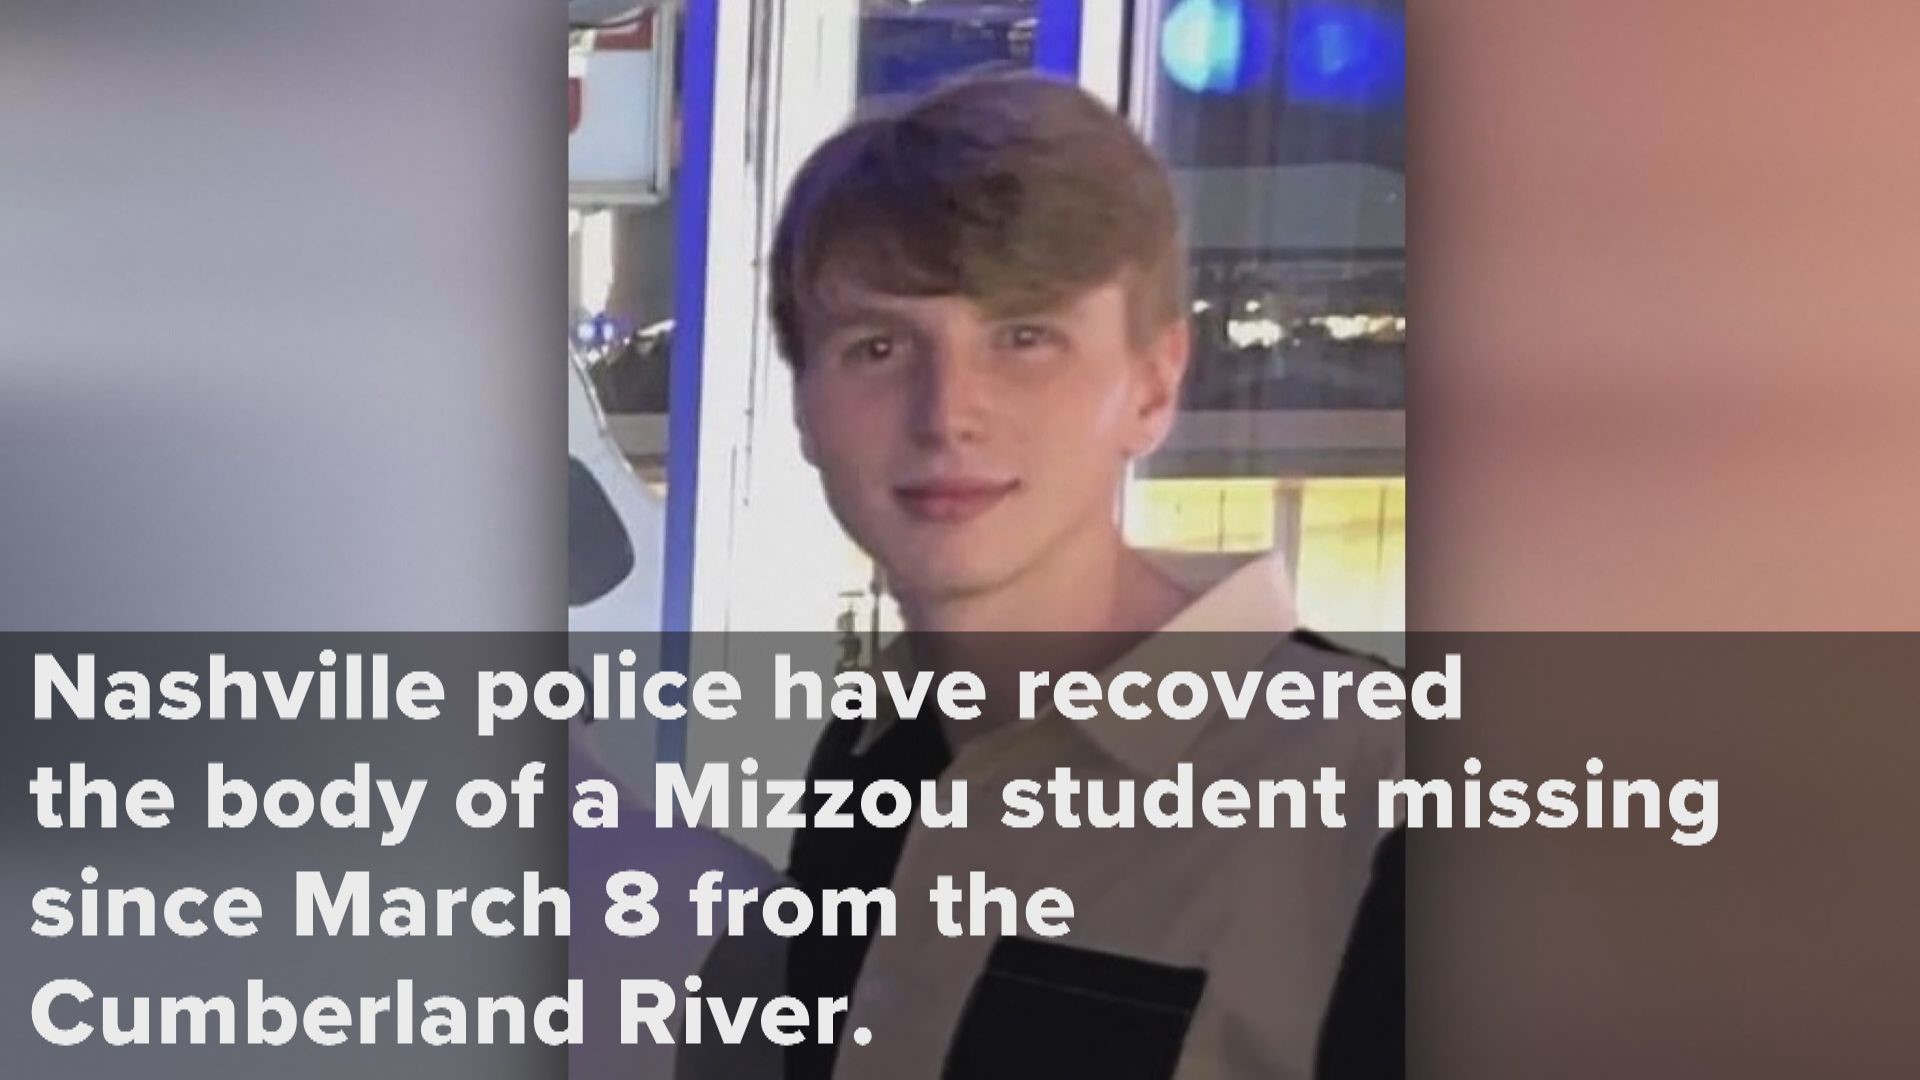 Police recovered the body from the Cumberland River downstream from where the 22-year-old student was last seen. Strain went missing March 8.